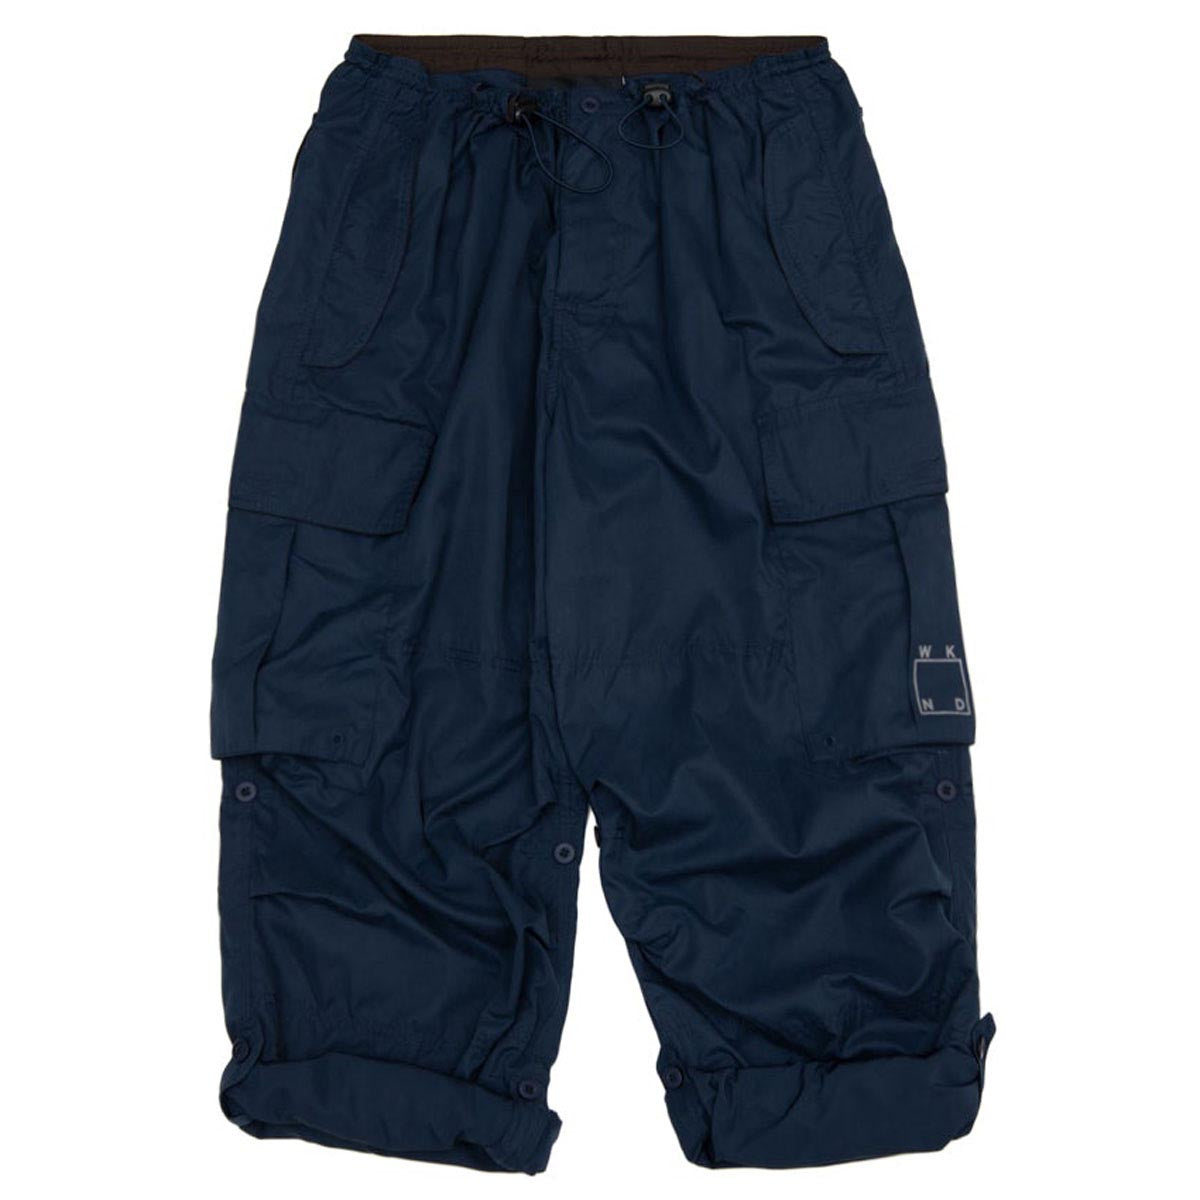 WKND Techie Dirtbags Pants - Navy image 3